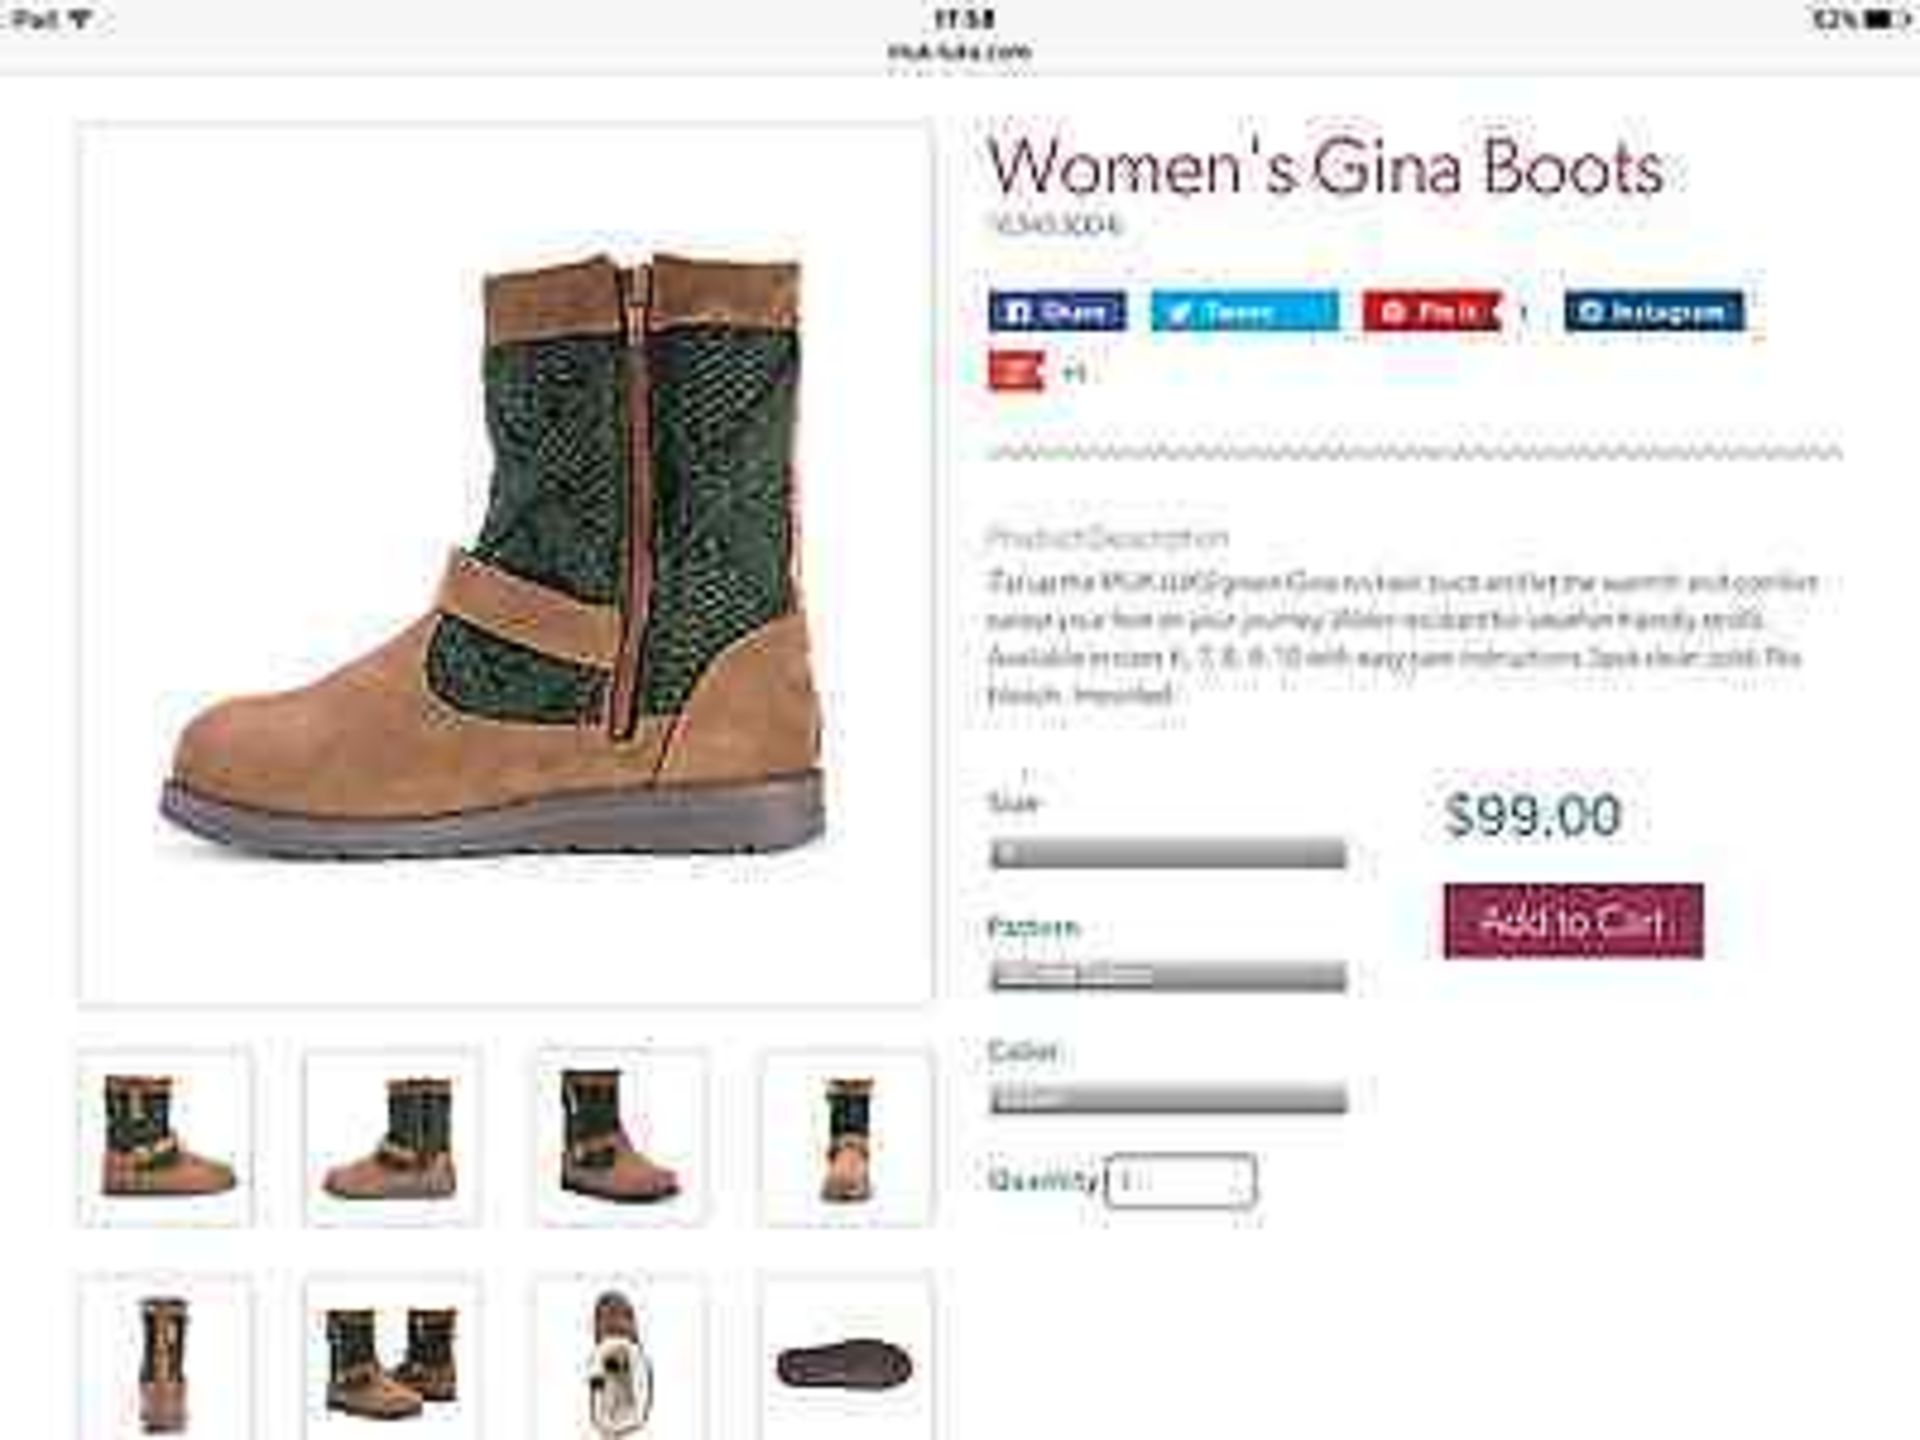 The Original Muk Luks Gina Boot, Size 5, RRP $99 (New without box) - Image 2 of 8